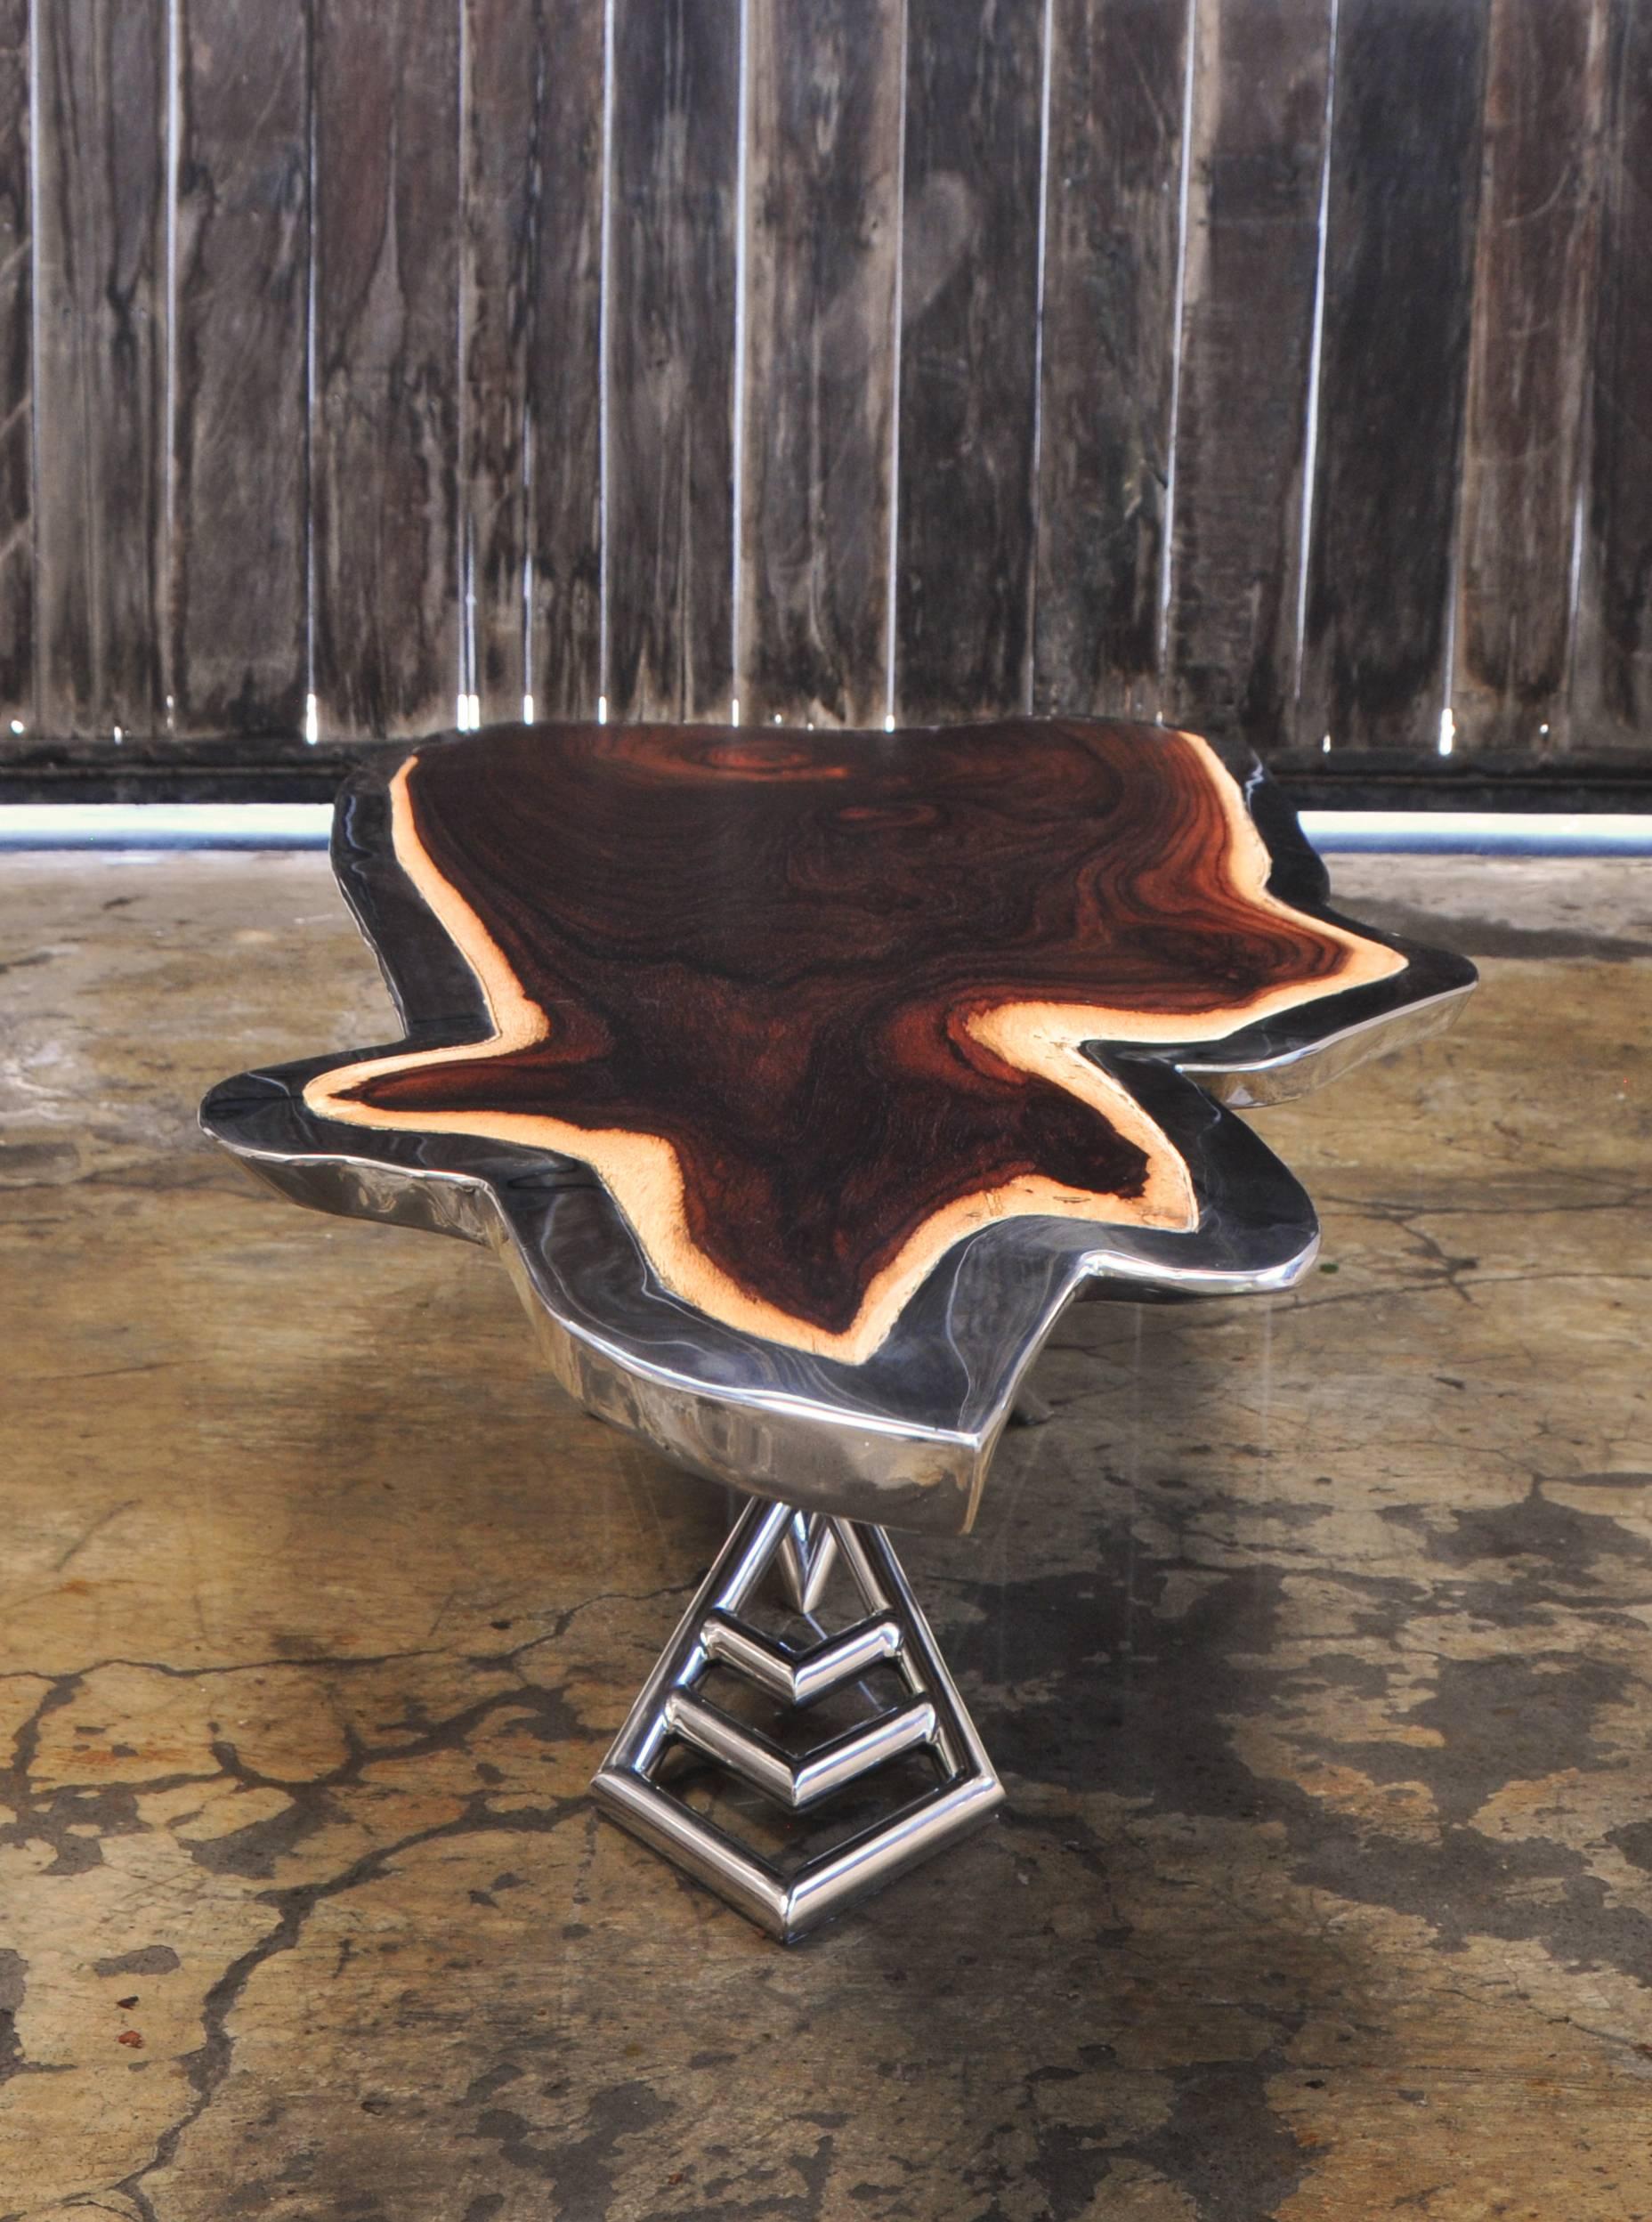 Hand-Crafted Kangaroo Coffee Table Made of Rosewood and Mirror Polished Stainless Steel